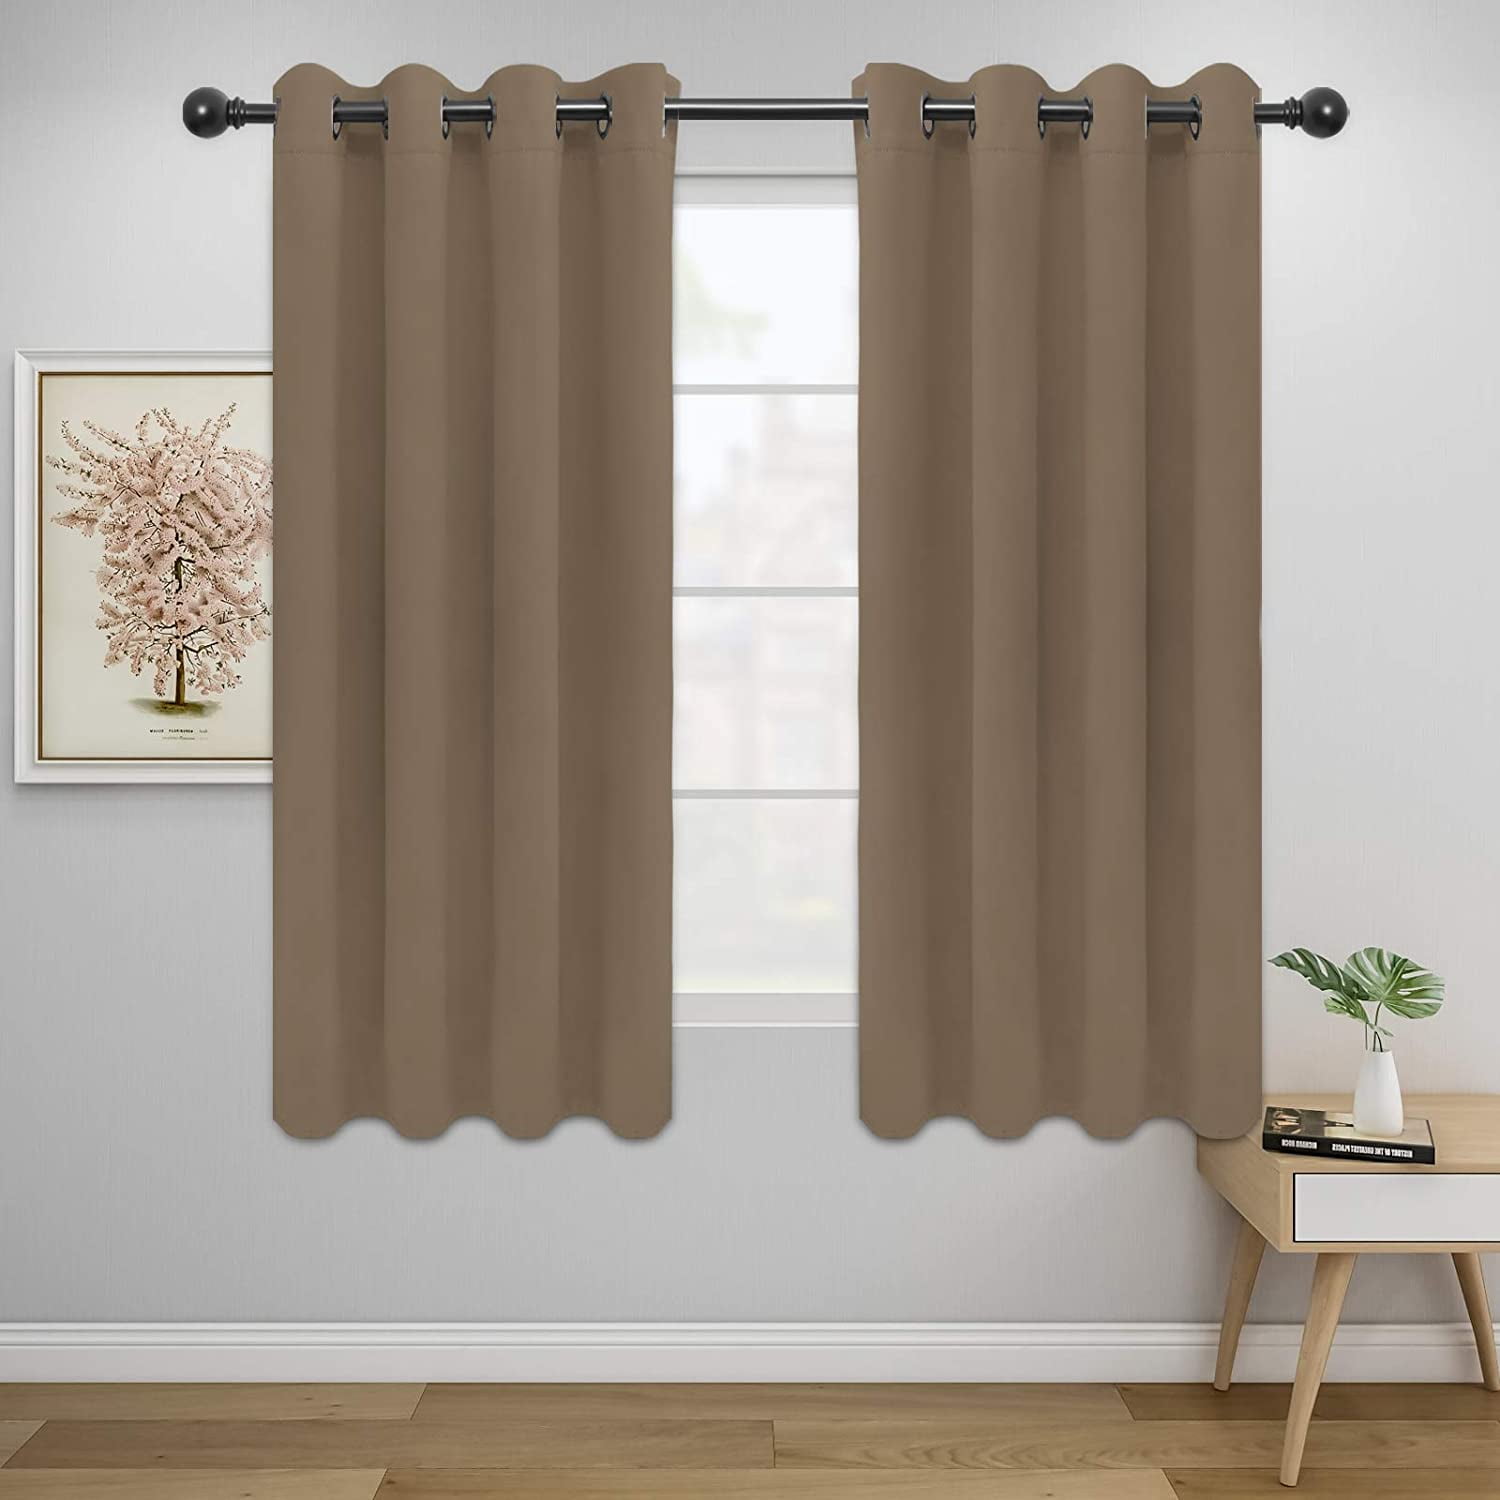 Coss Brown Wood Boards 3D Curtain Blockout Photo Printing Curtains Drape Fabric 